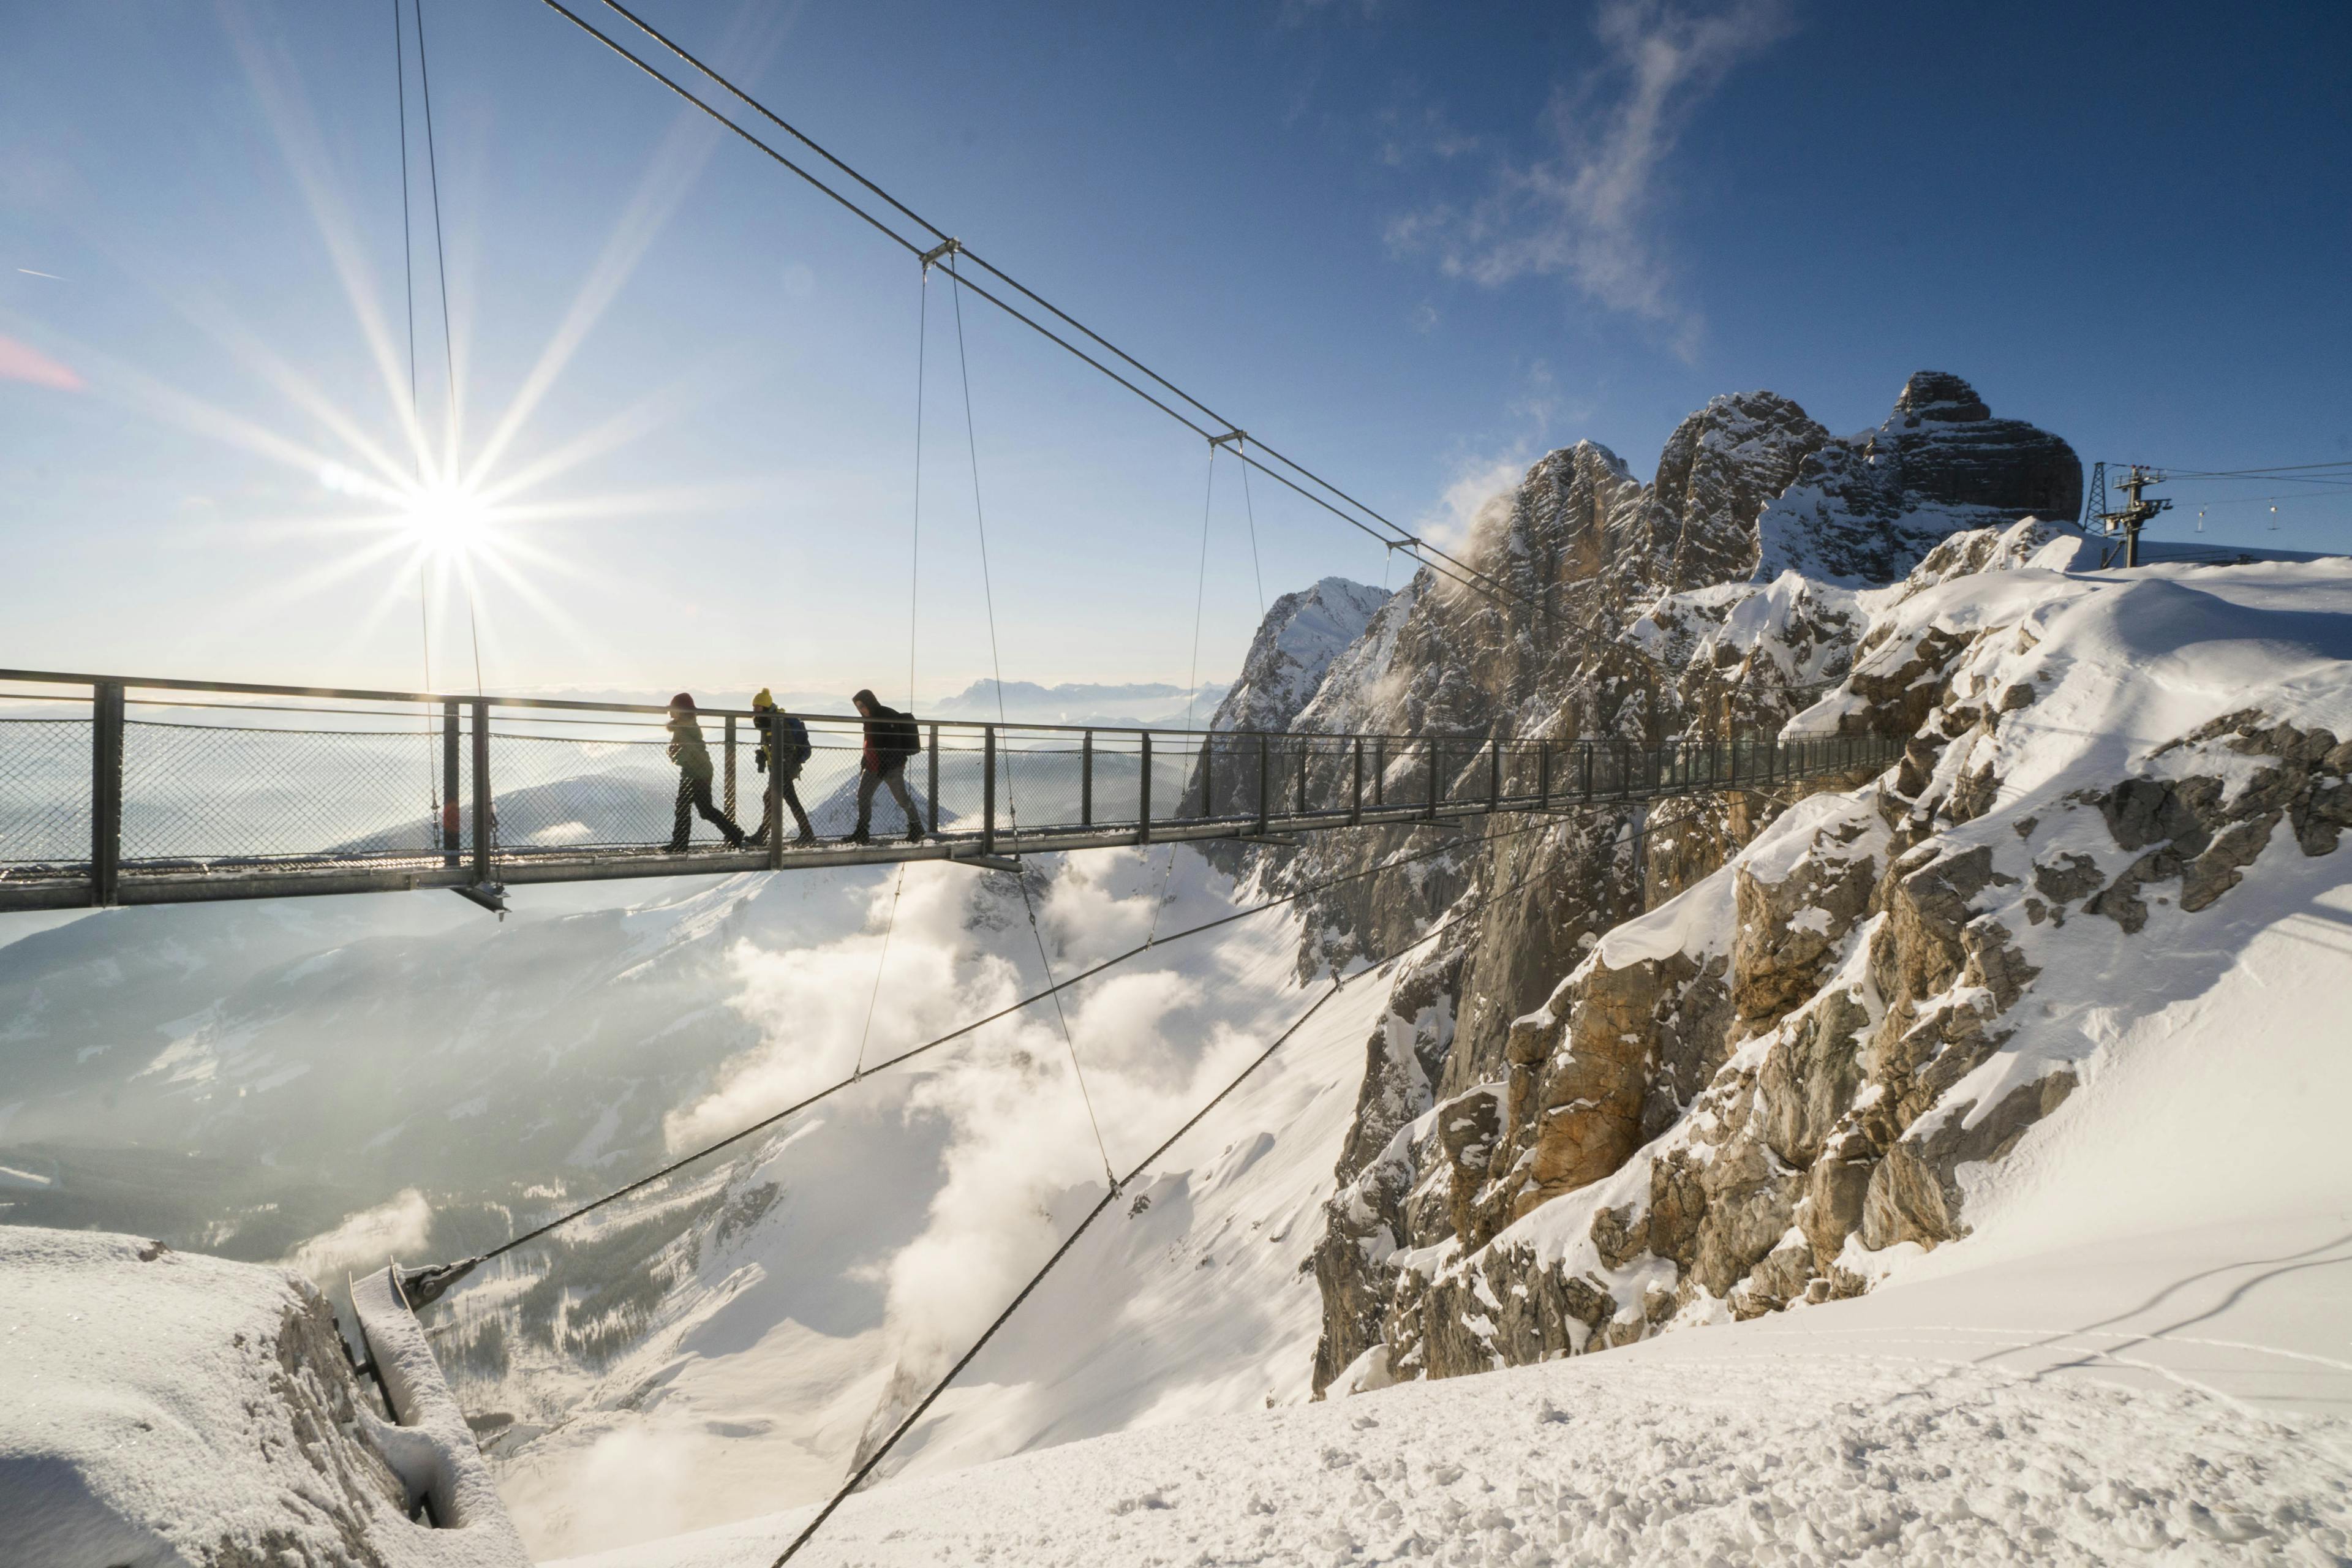 Walkers crossing bridge at high altitude in snowy mountains of schladming ski resort